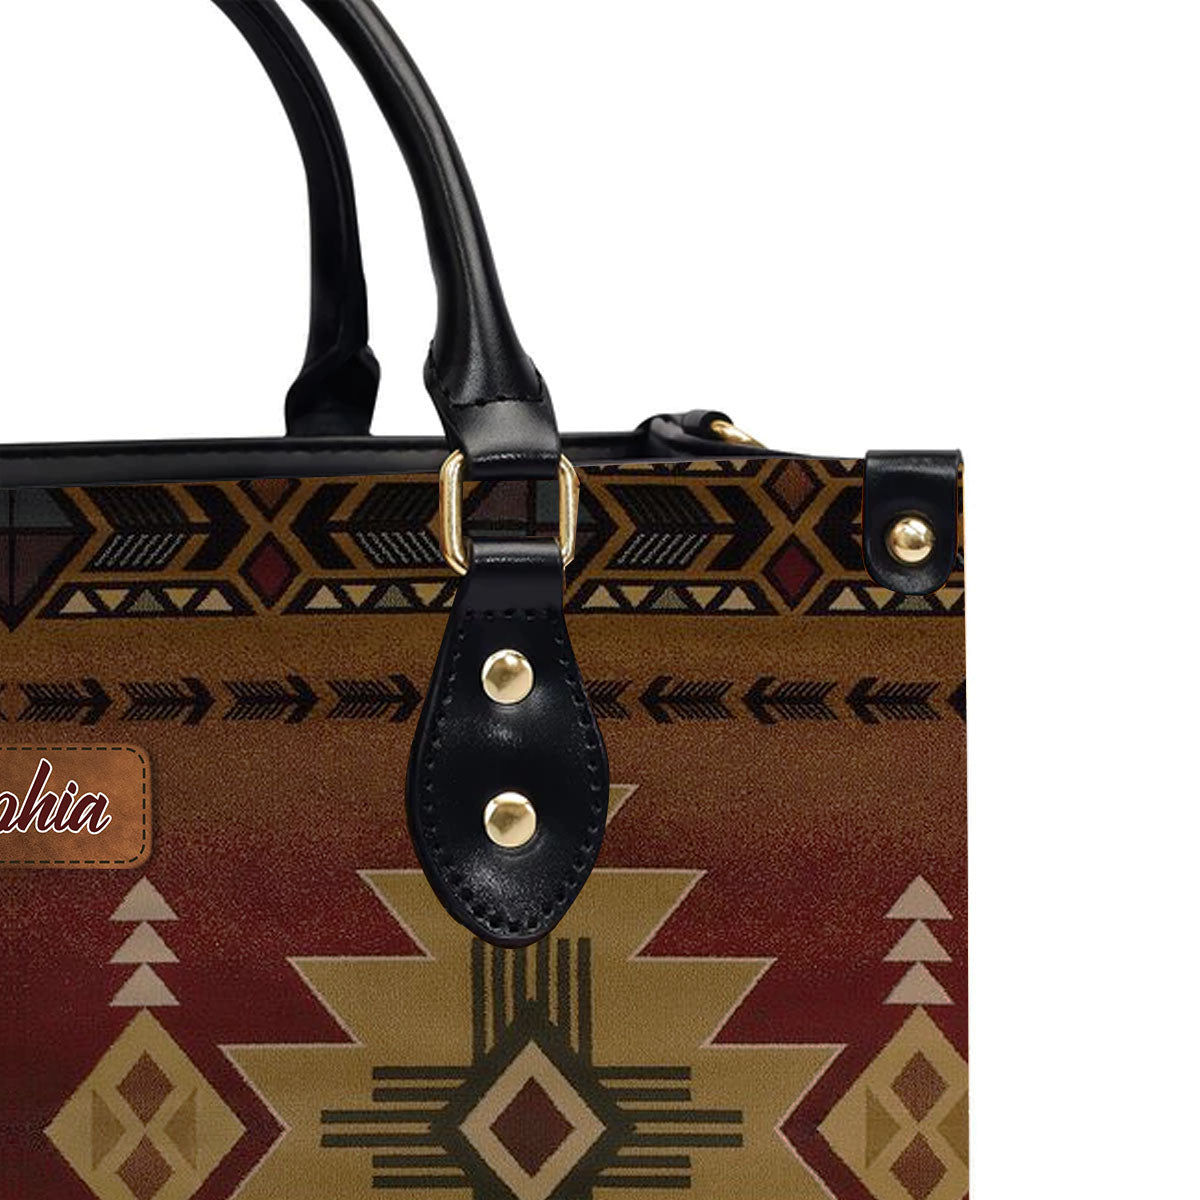 Christianartbag Handbags, Vintage hand-woven southwest lacing design, Personalized Bags, Gifts for Women, Christmas Gift, CABLTB01070923. - Christian Art Bag